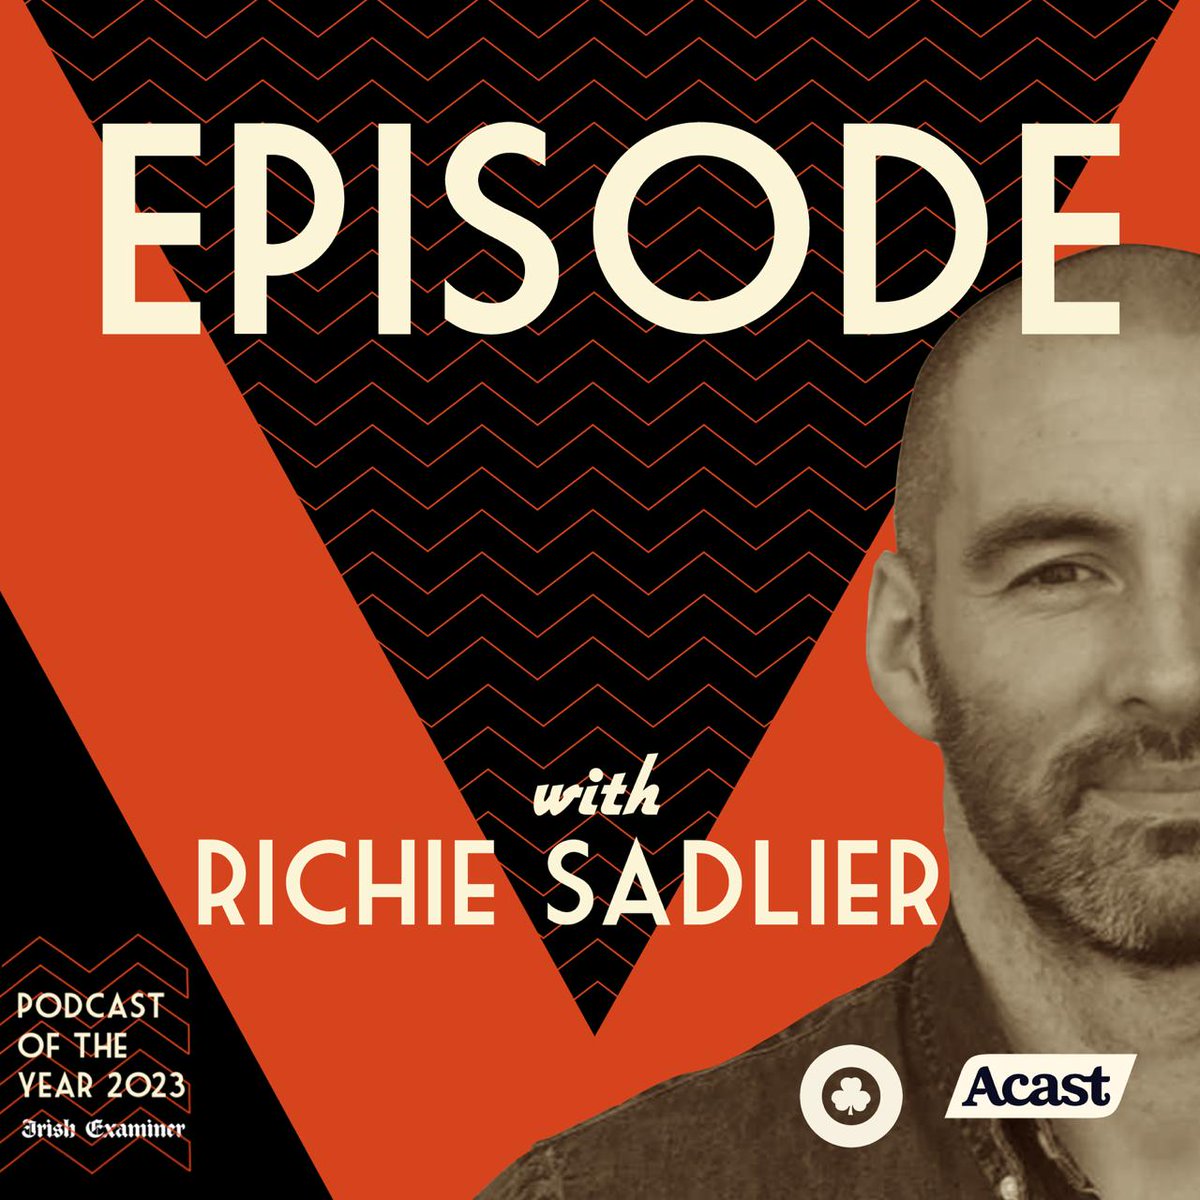 In our series two opener, Vera Pauw joins @RichieSadlier on Episode for her first interview since the week she was let go by the FAI seven months ago You can listen from midday via the Episode with Richie Sadlier feed, wherever you get your podcasts ⏰ open.spotify.com/show/0DKcZmLpi…